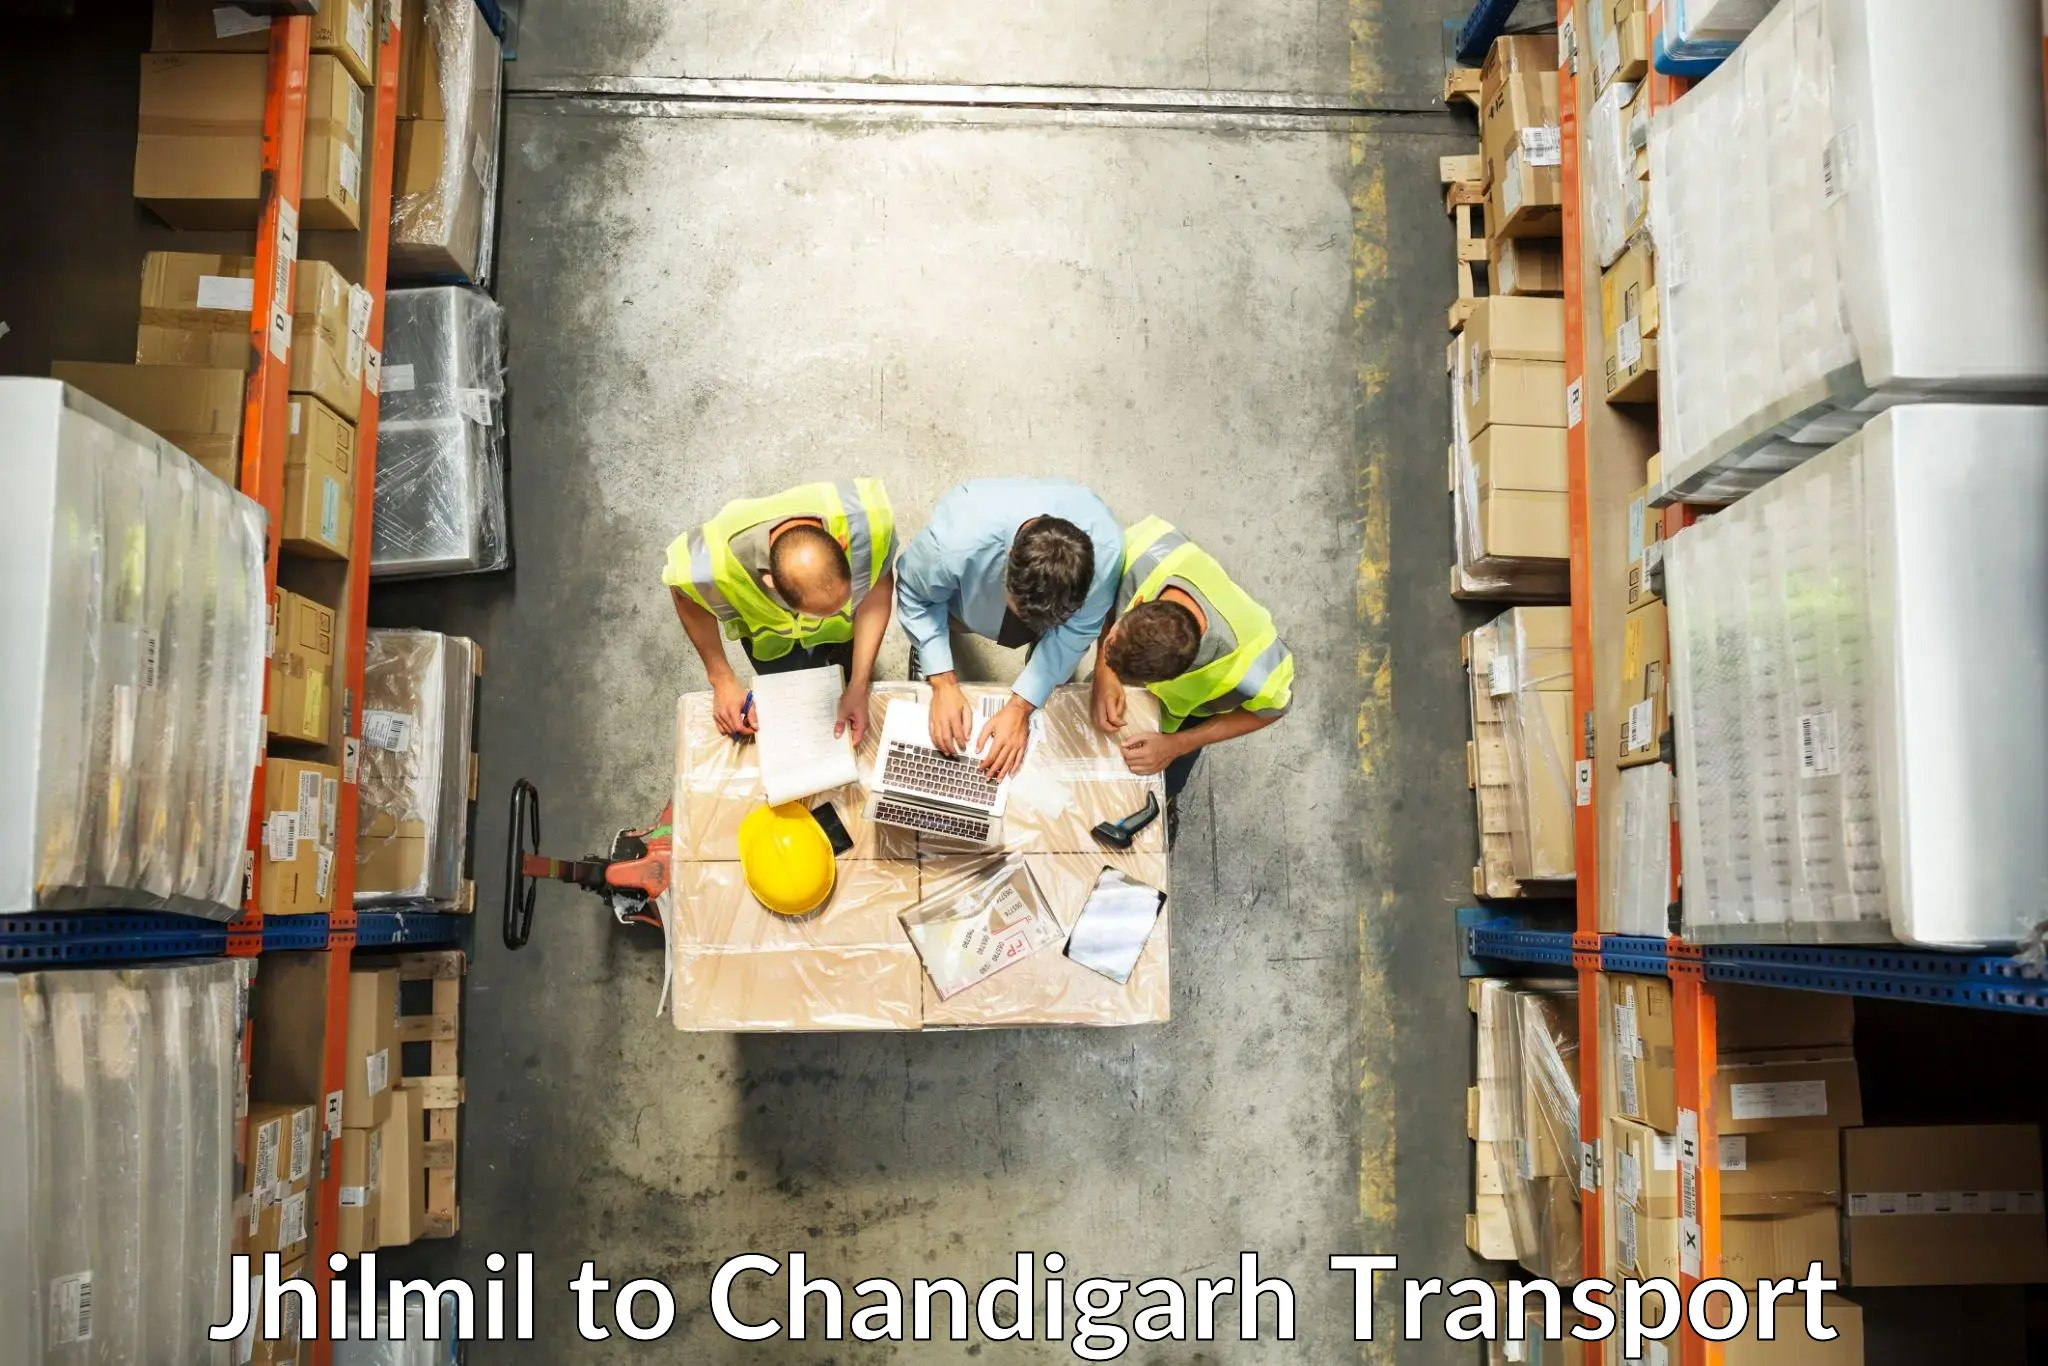 Part load transport service in India Jhilmil to Chandigarh